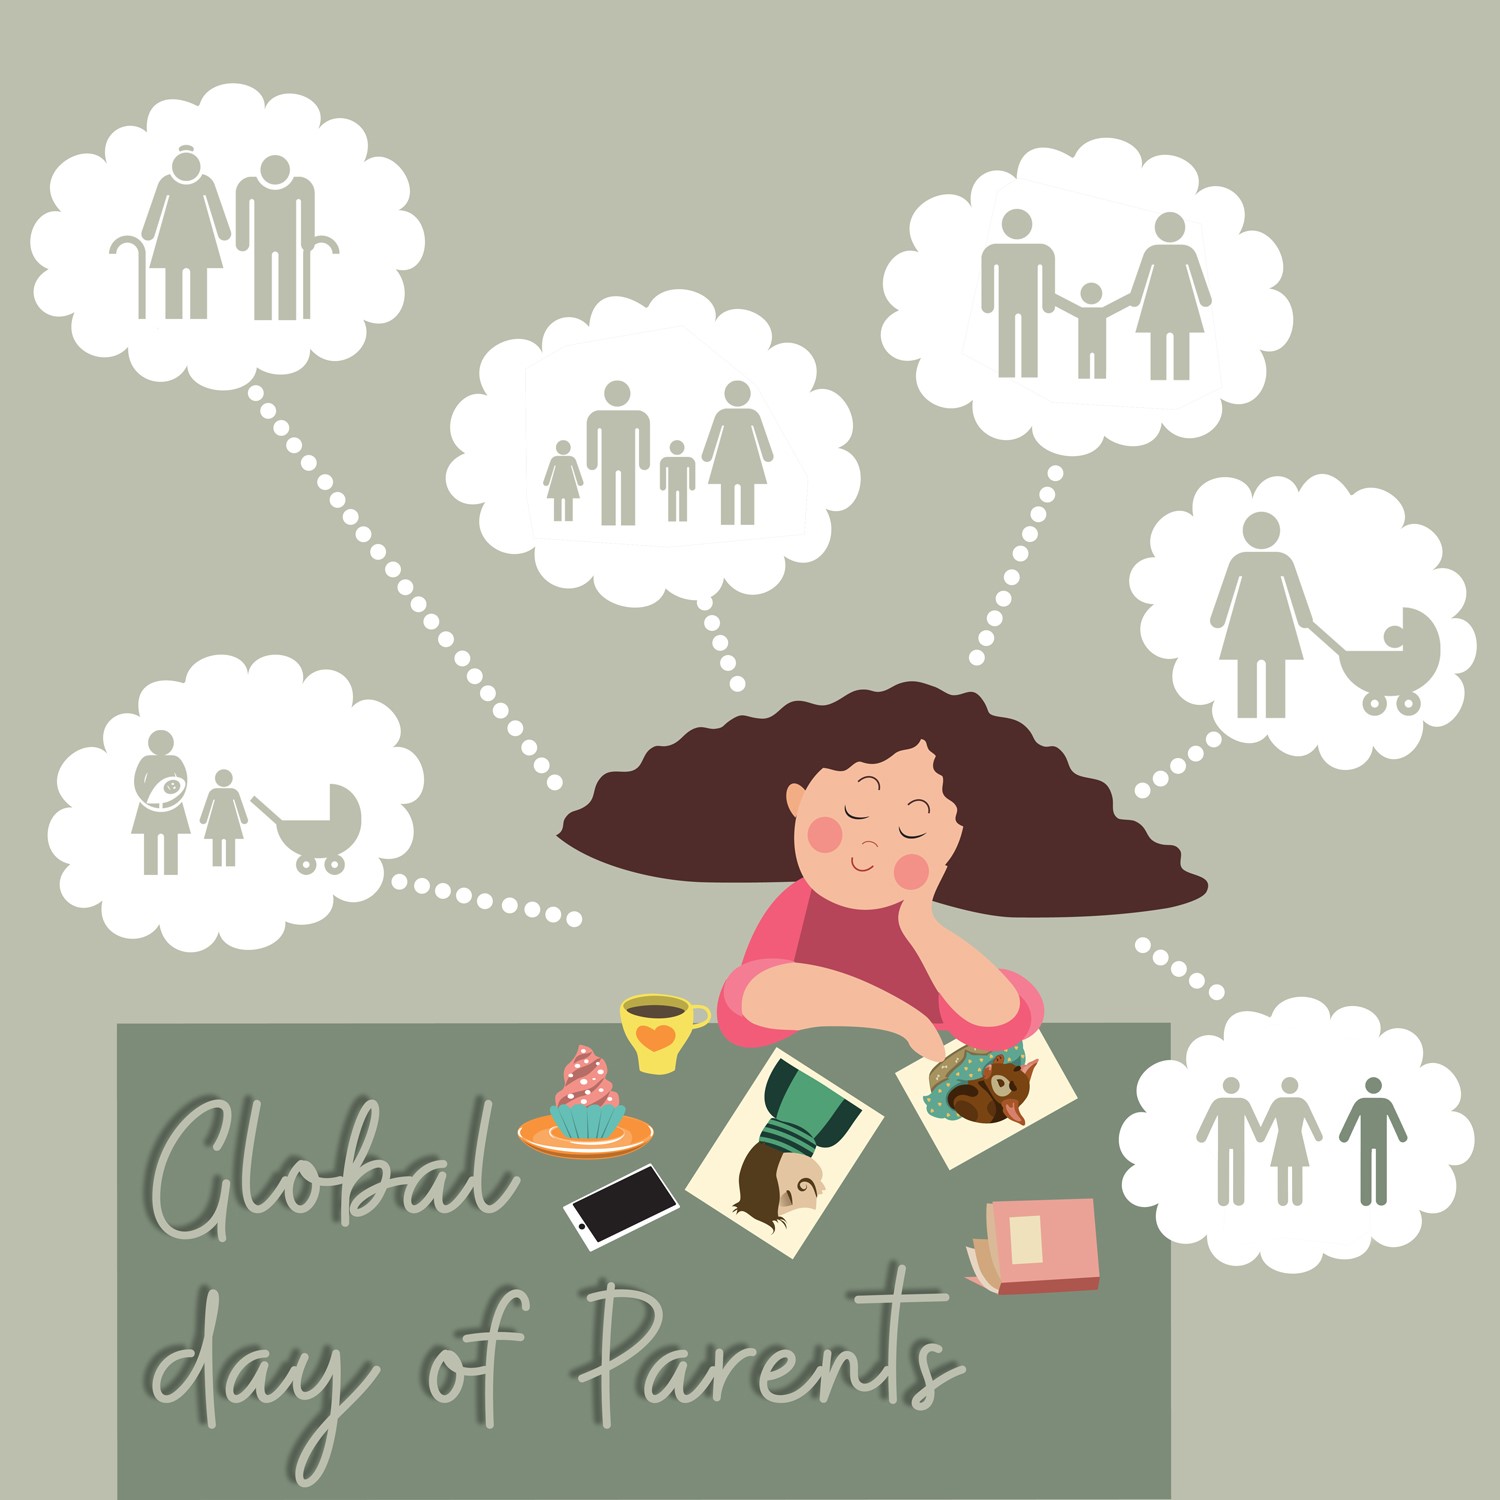 First of june is the global day of parents